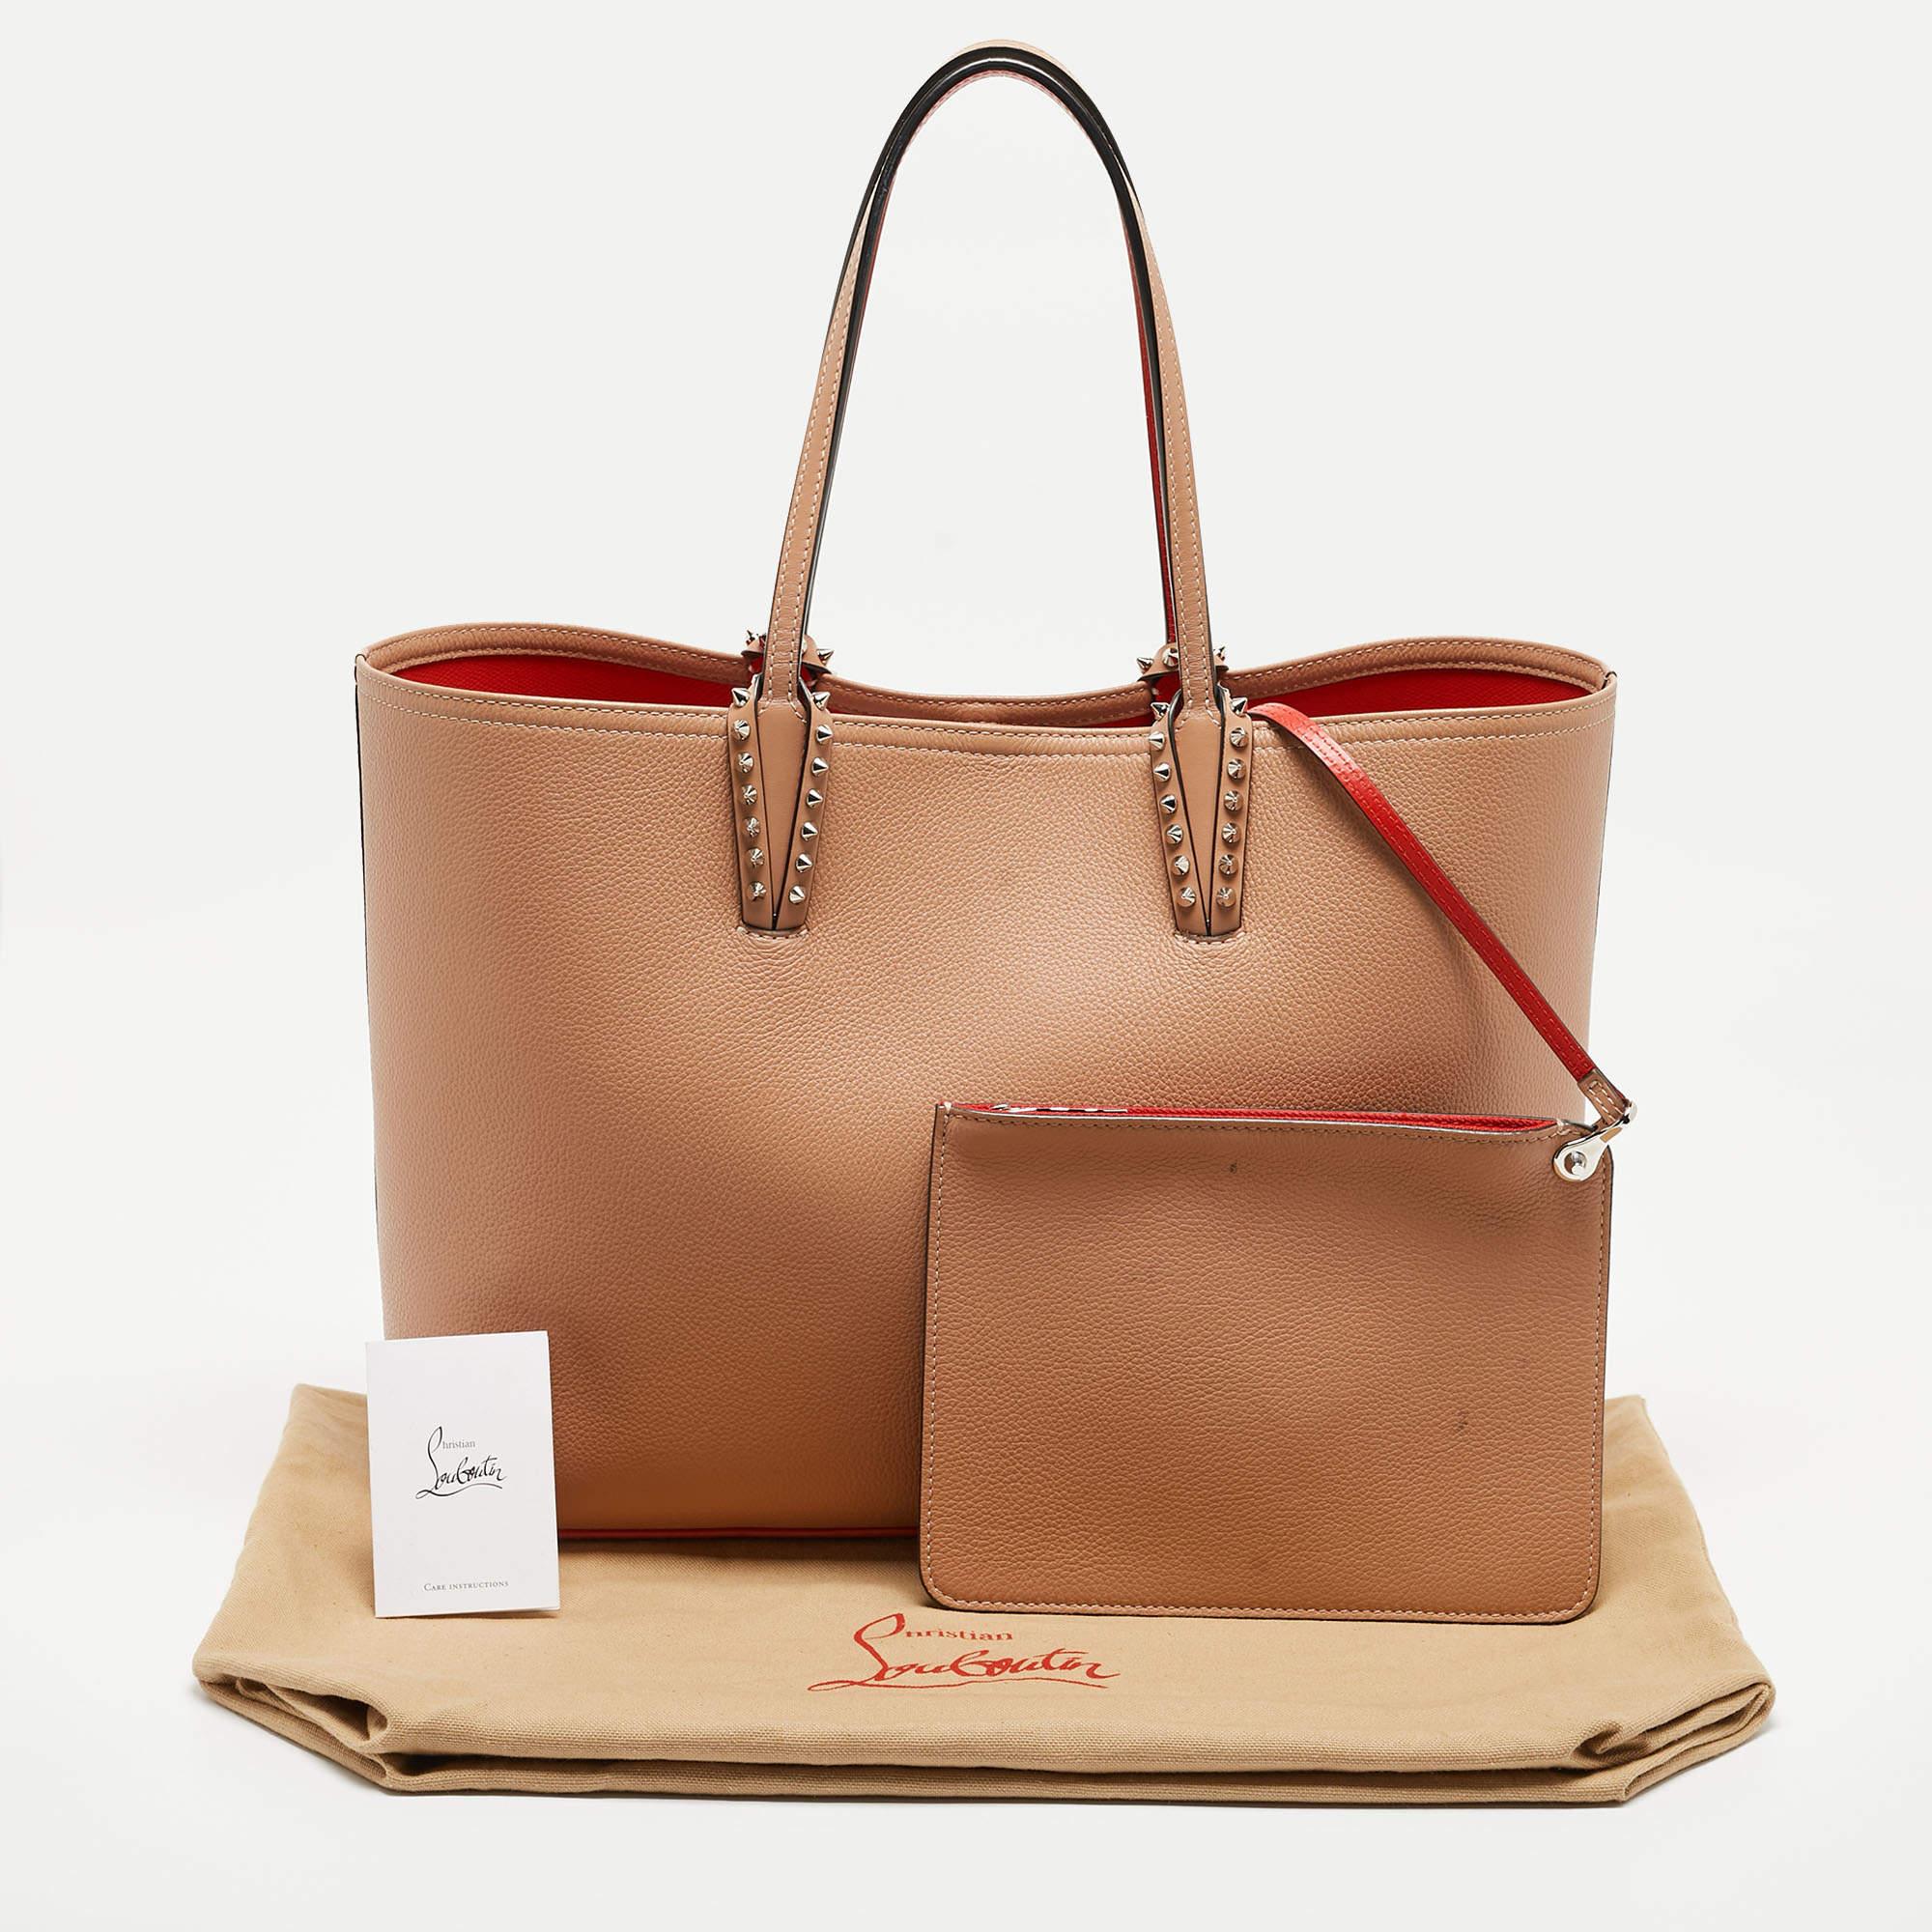 Christian Louboutin Beige/Red Leather and Rubber Cabata Tote 3